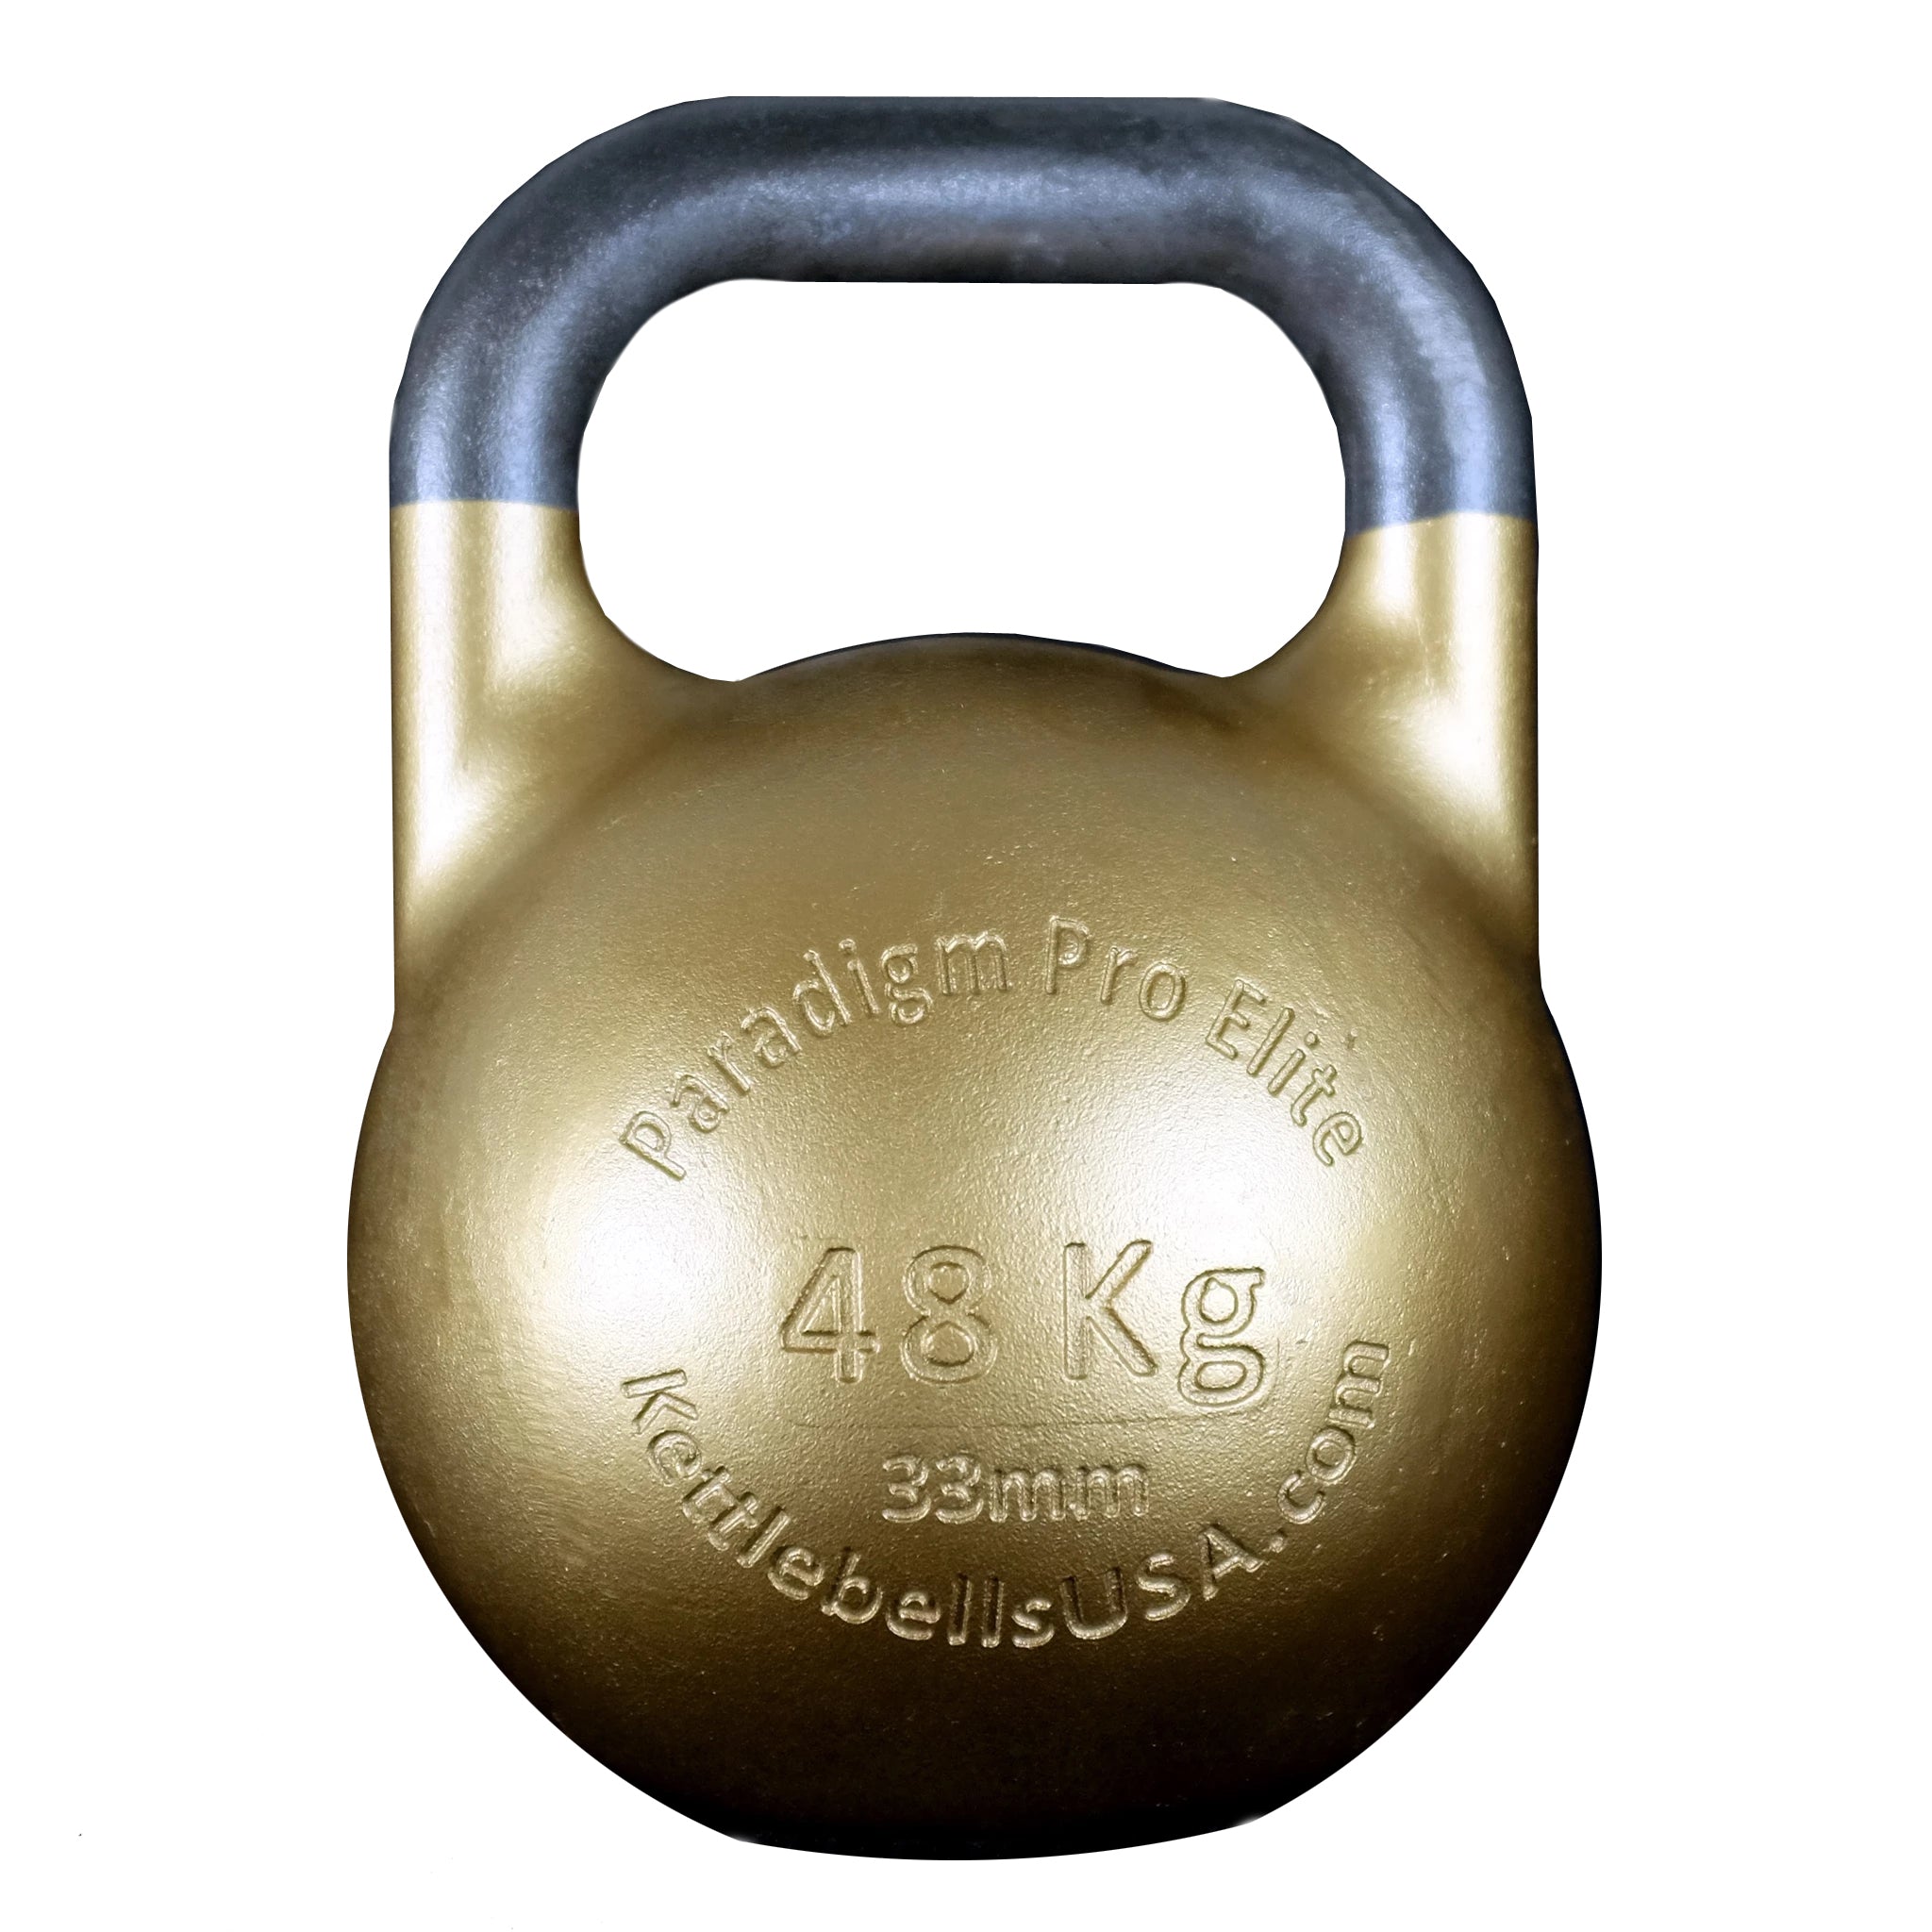 Quest Competition Kettlebell - 24KG/53LB